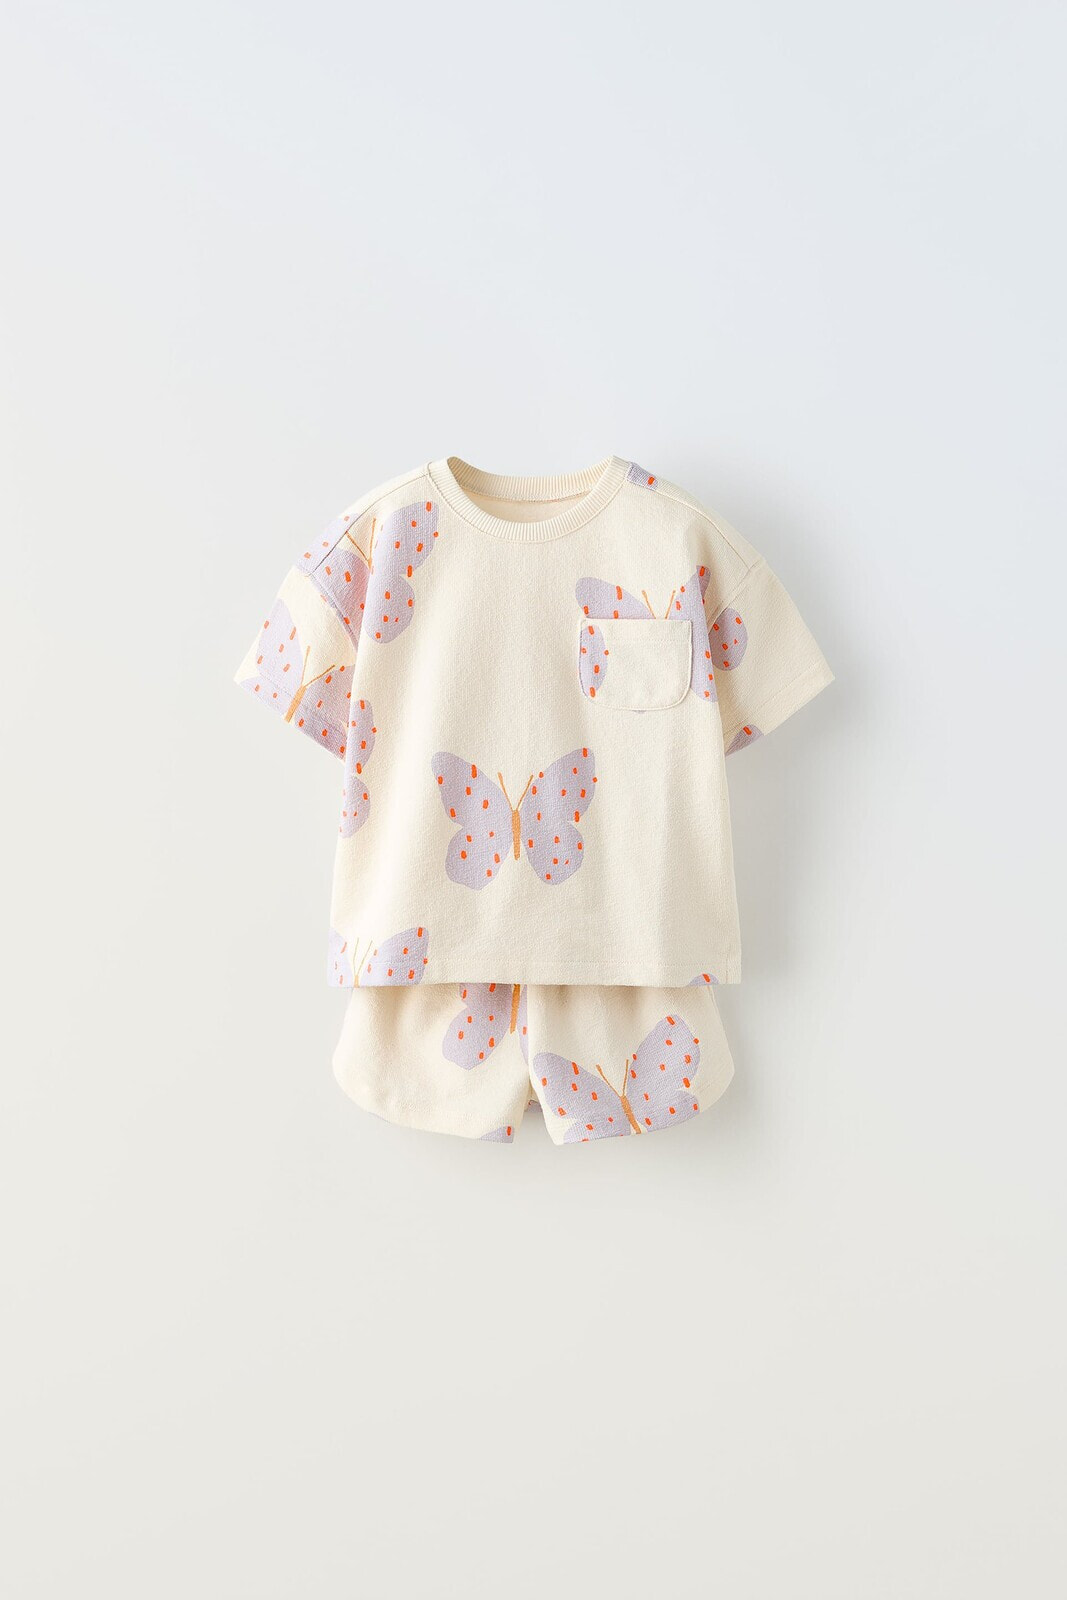 Butterfly t-shirt and bermuda shorts co-ord